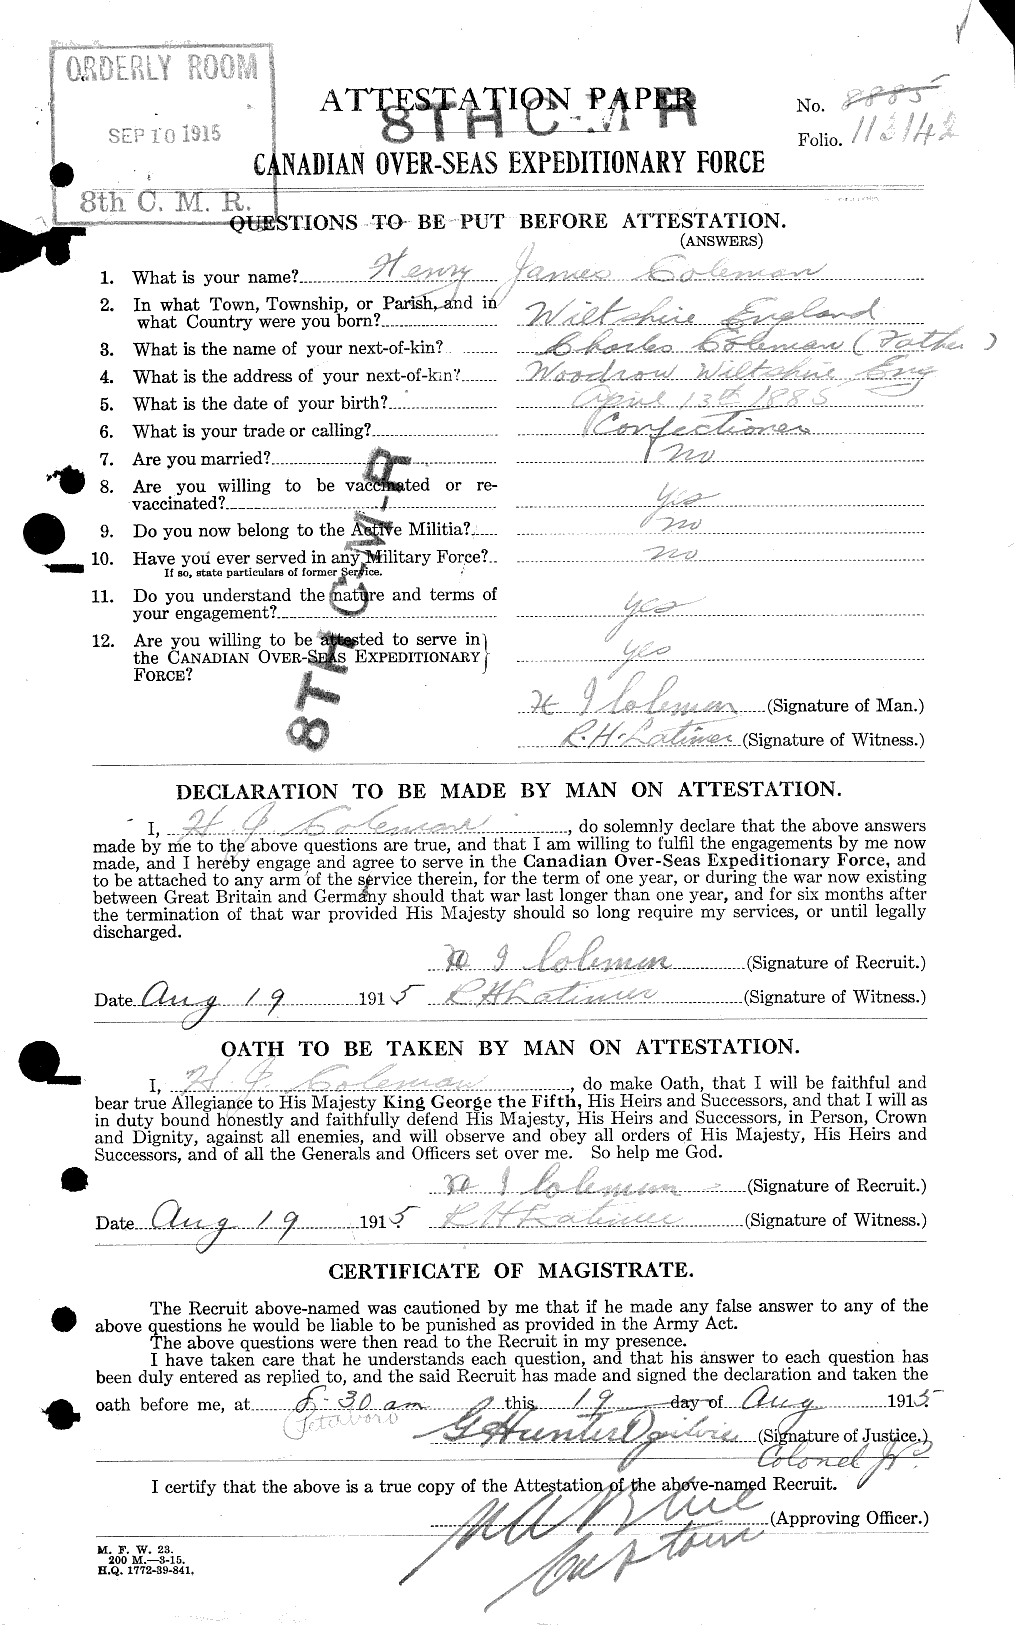 Personnel Records of the First World War - CEF 028169a